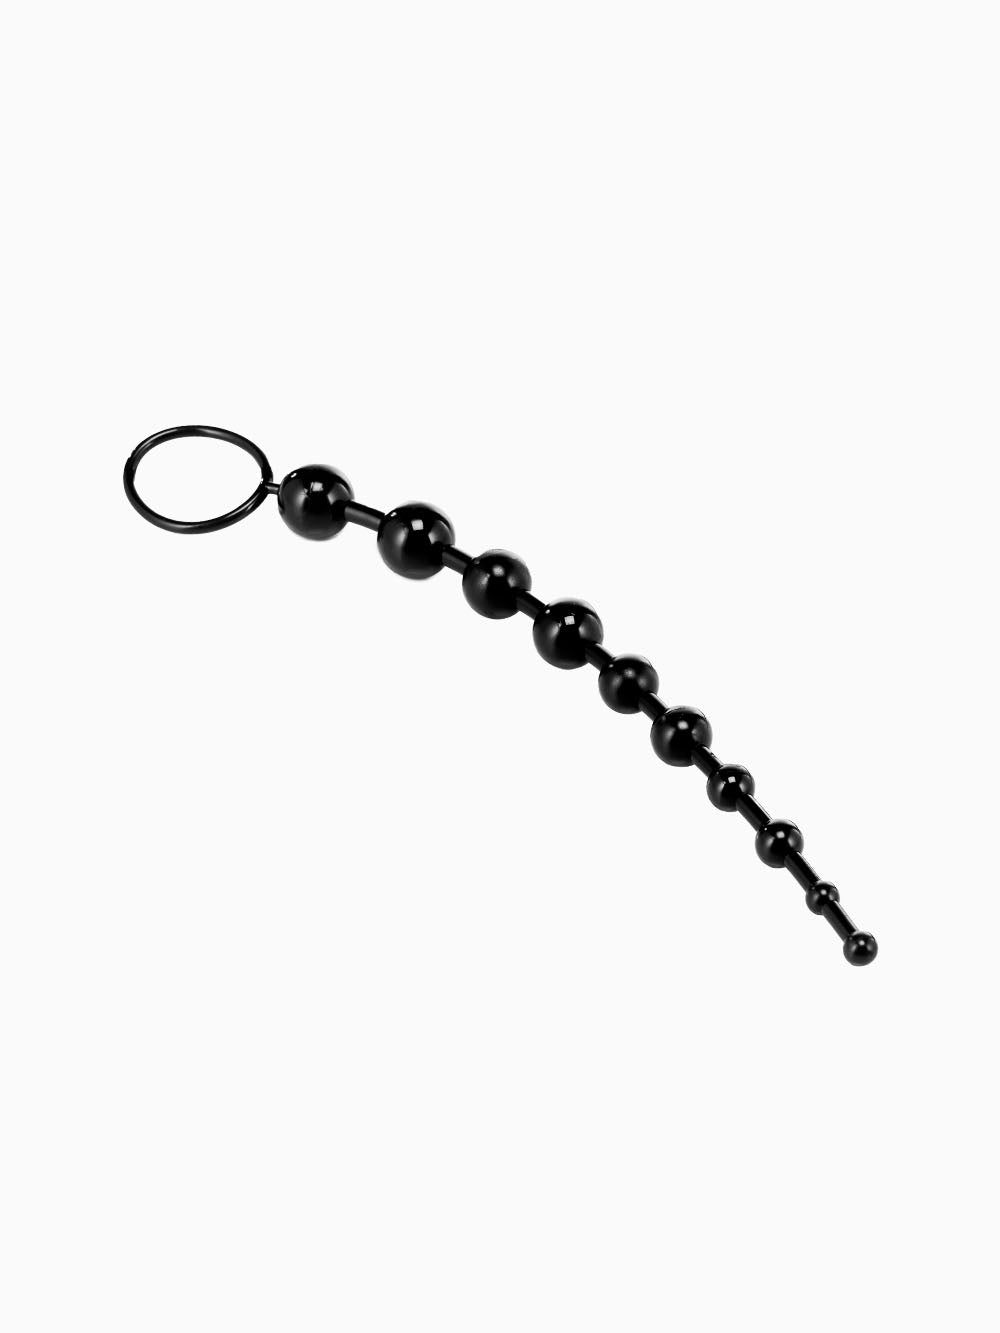 Pillow Talk Anal Beads 12 Inches - Black